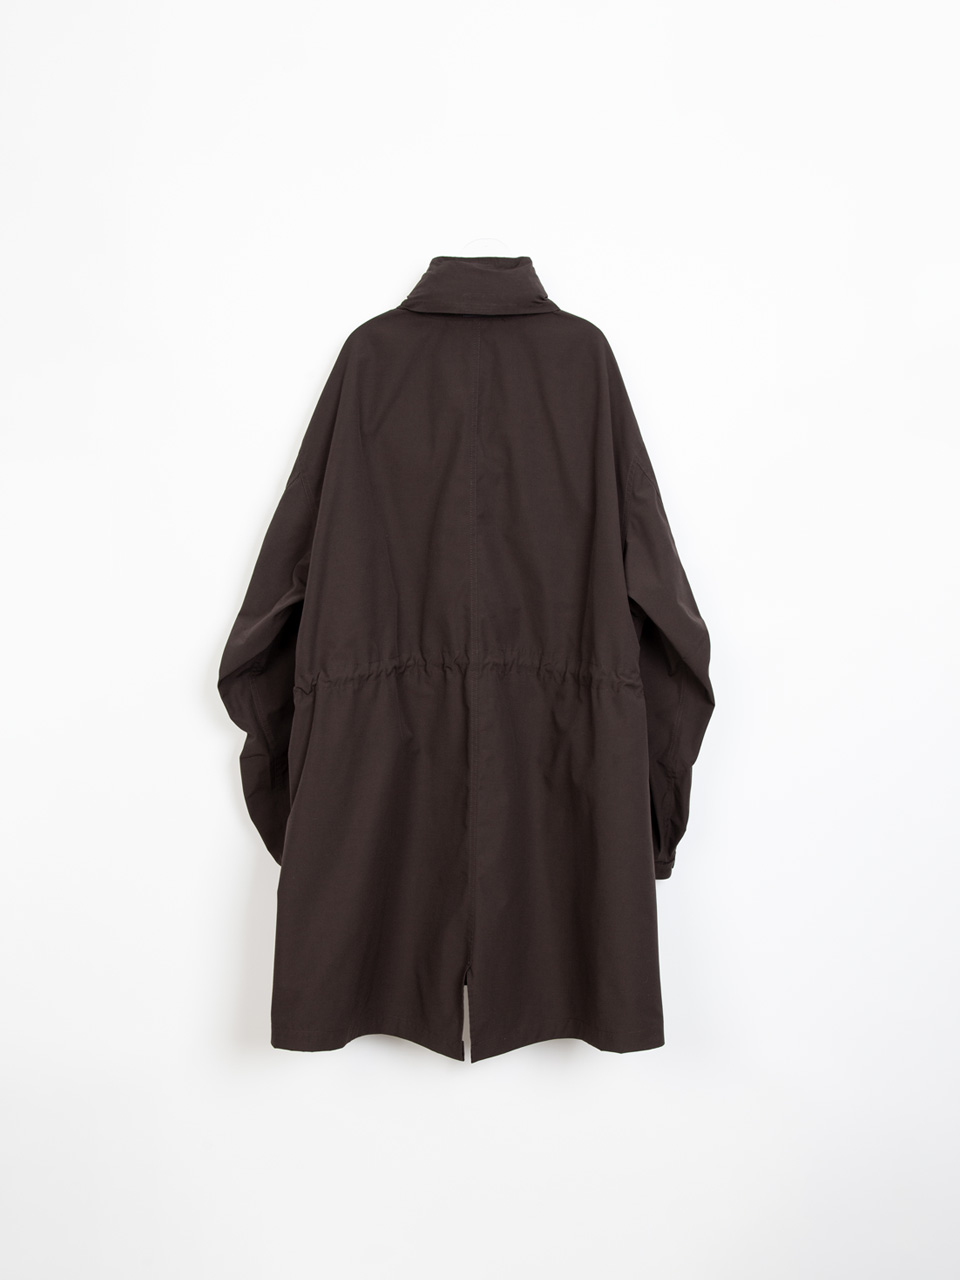 MATISSE THE CURATOR - FISHTAIL PARKA (BROWN)